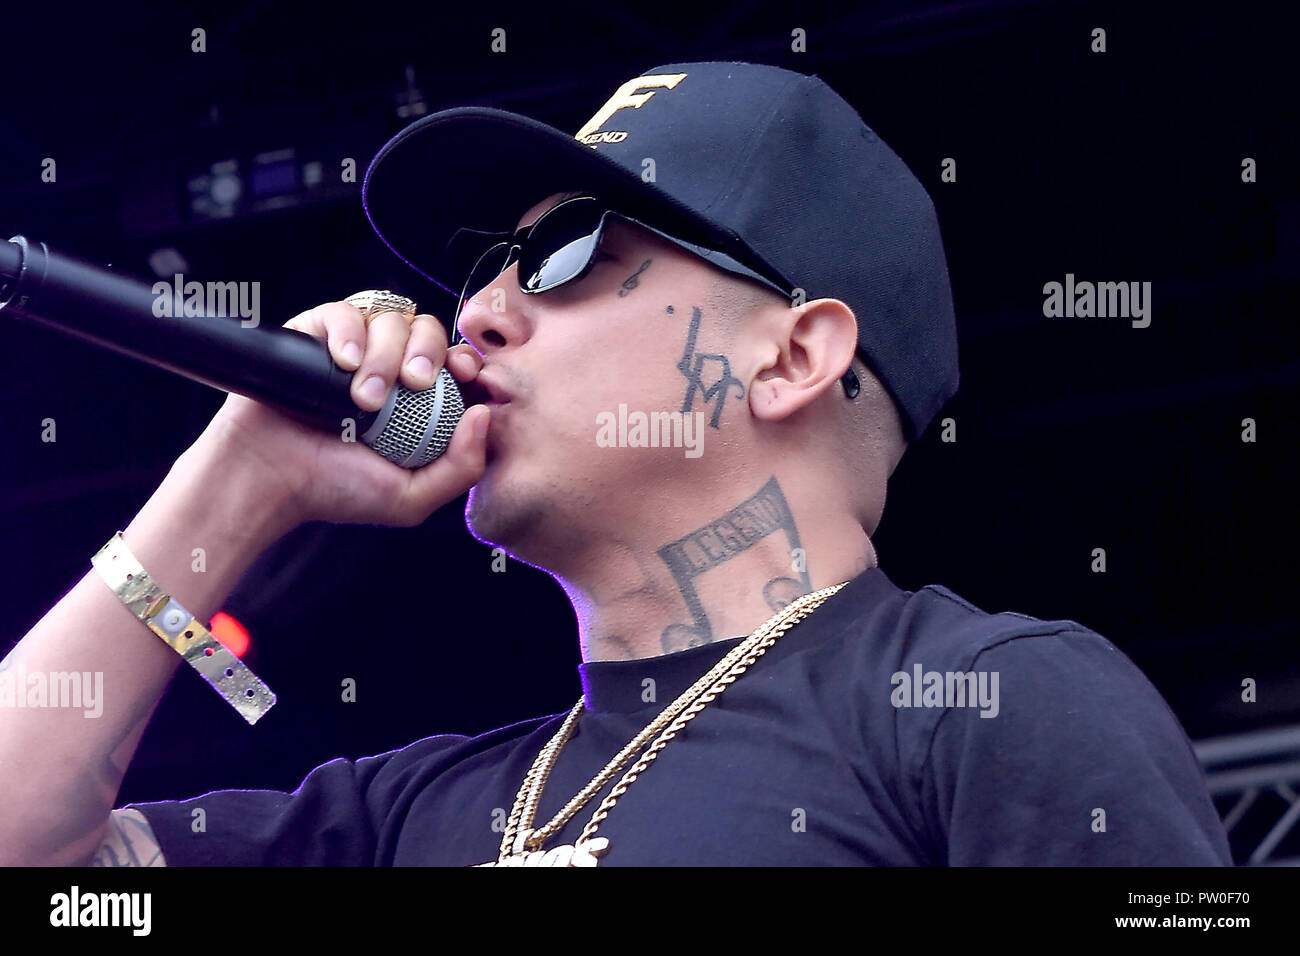 The Breaks Vol. II Festival Concert in Chicago at Toyota Park on September 8, 2018  Featuring: King Lil G Where: Bedford Park, Illinois, United States When: 08 Sep 2018 Credit: Adam Bielawski/WENN.com Stock Photo